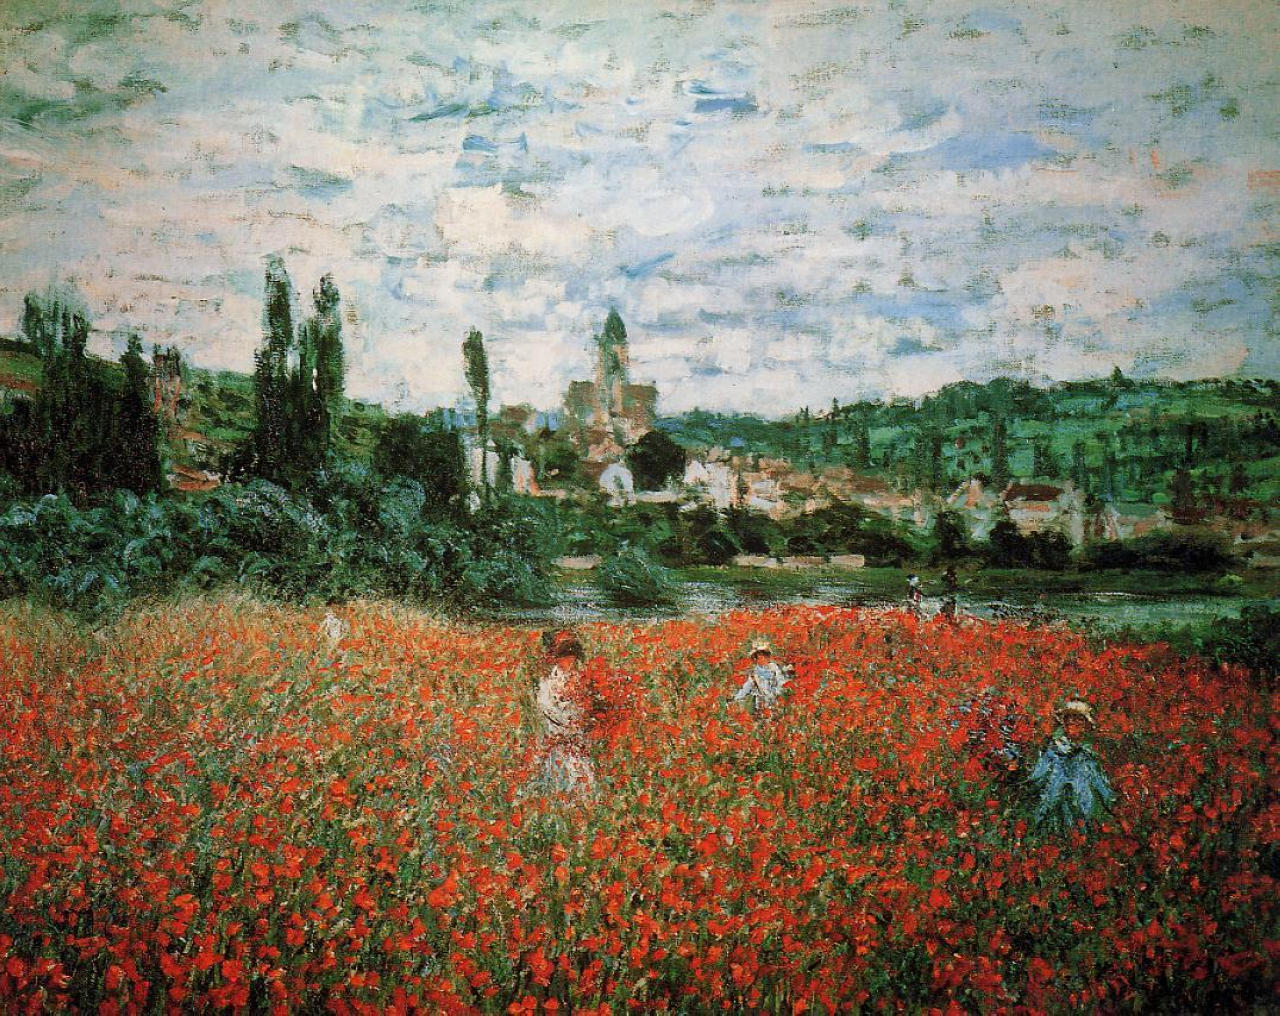 Poppy Field near Vetheuil by Claude Monet - 1879 - 71.5 x 91.5 cm private collection